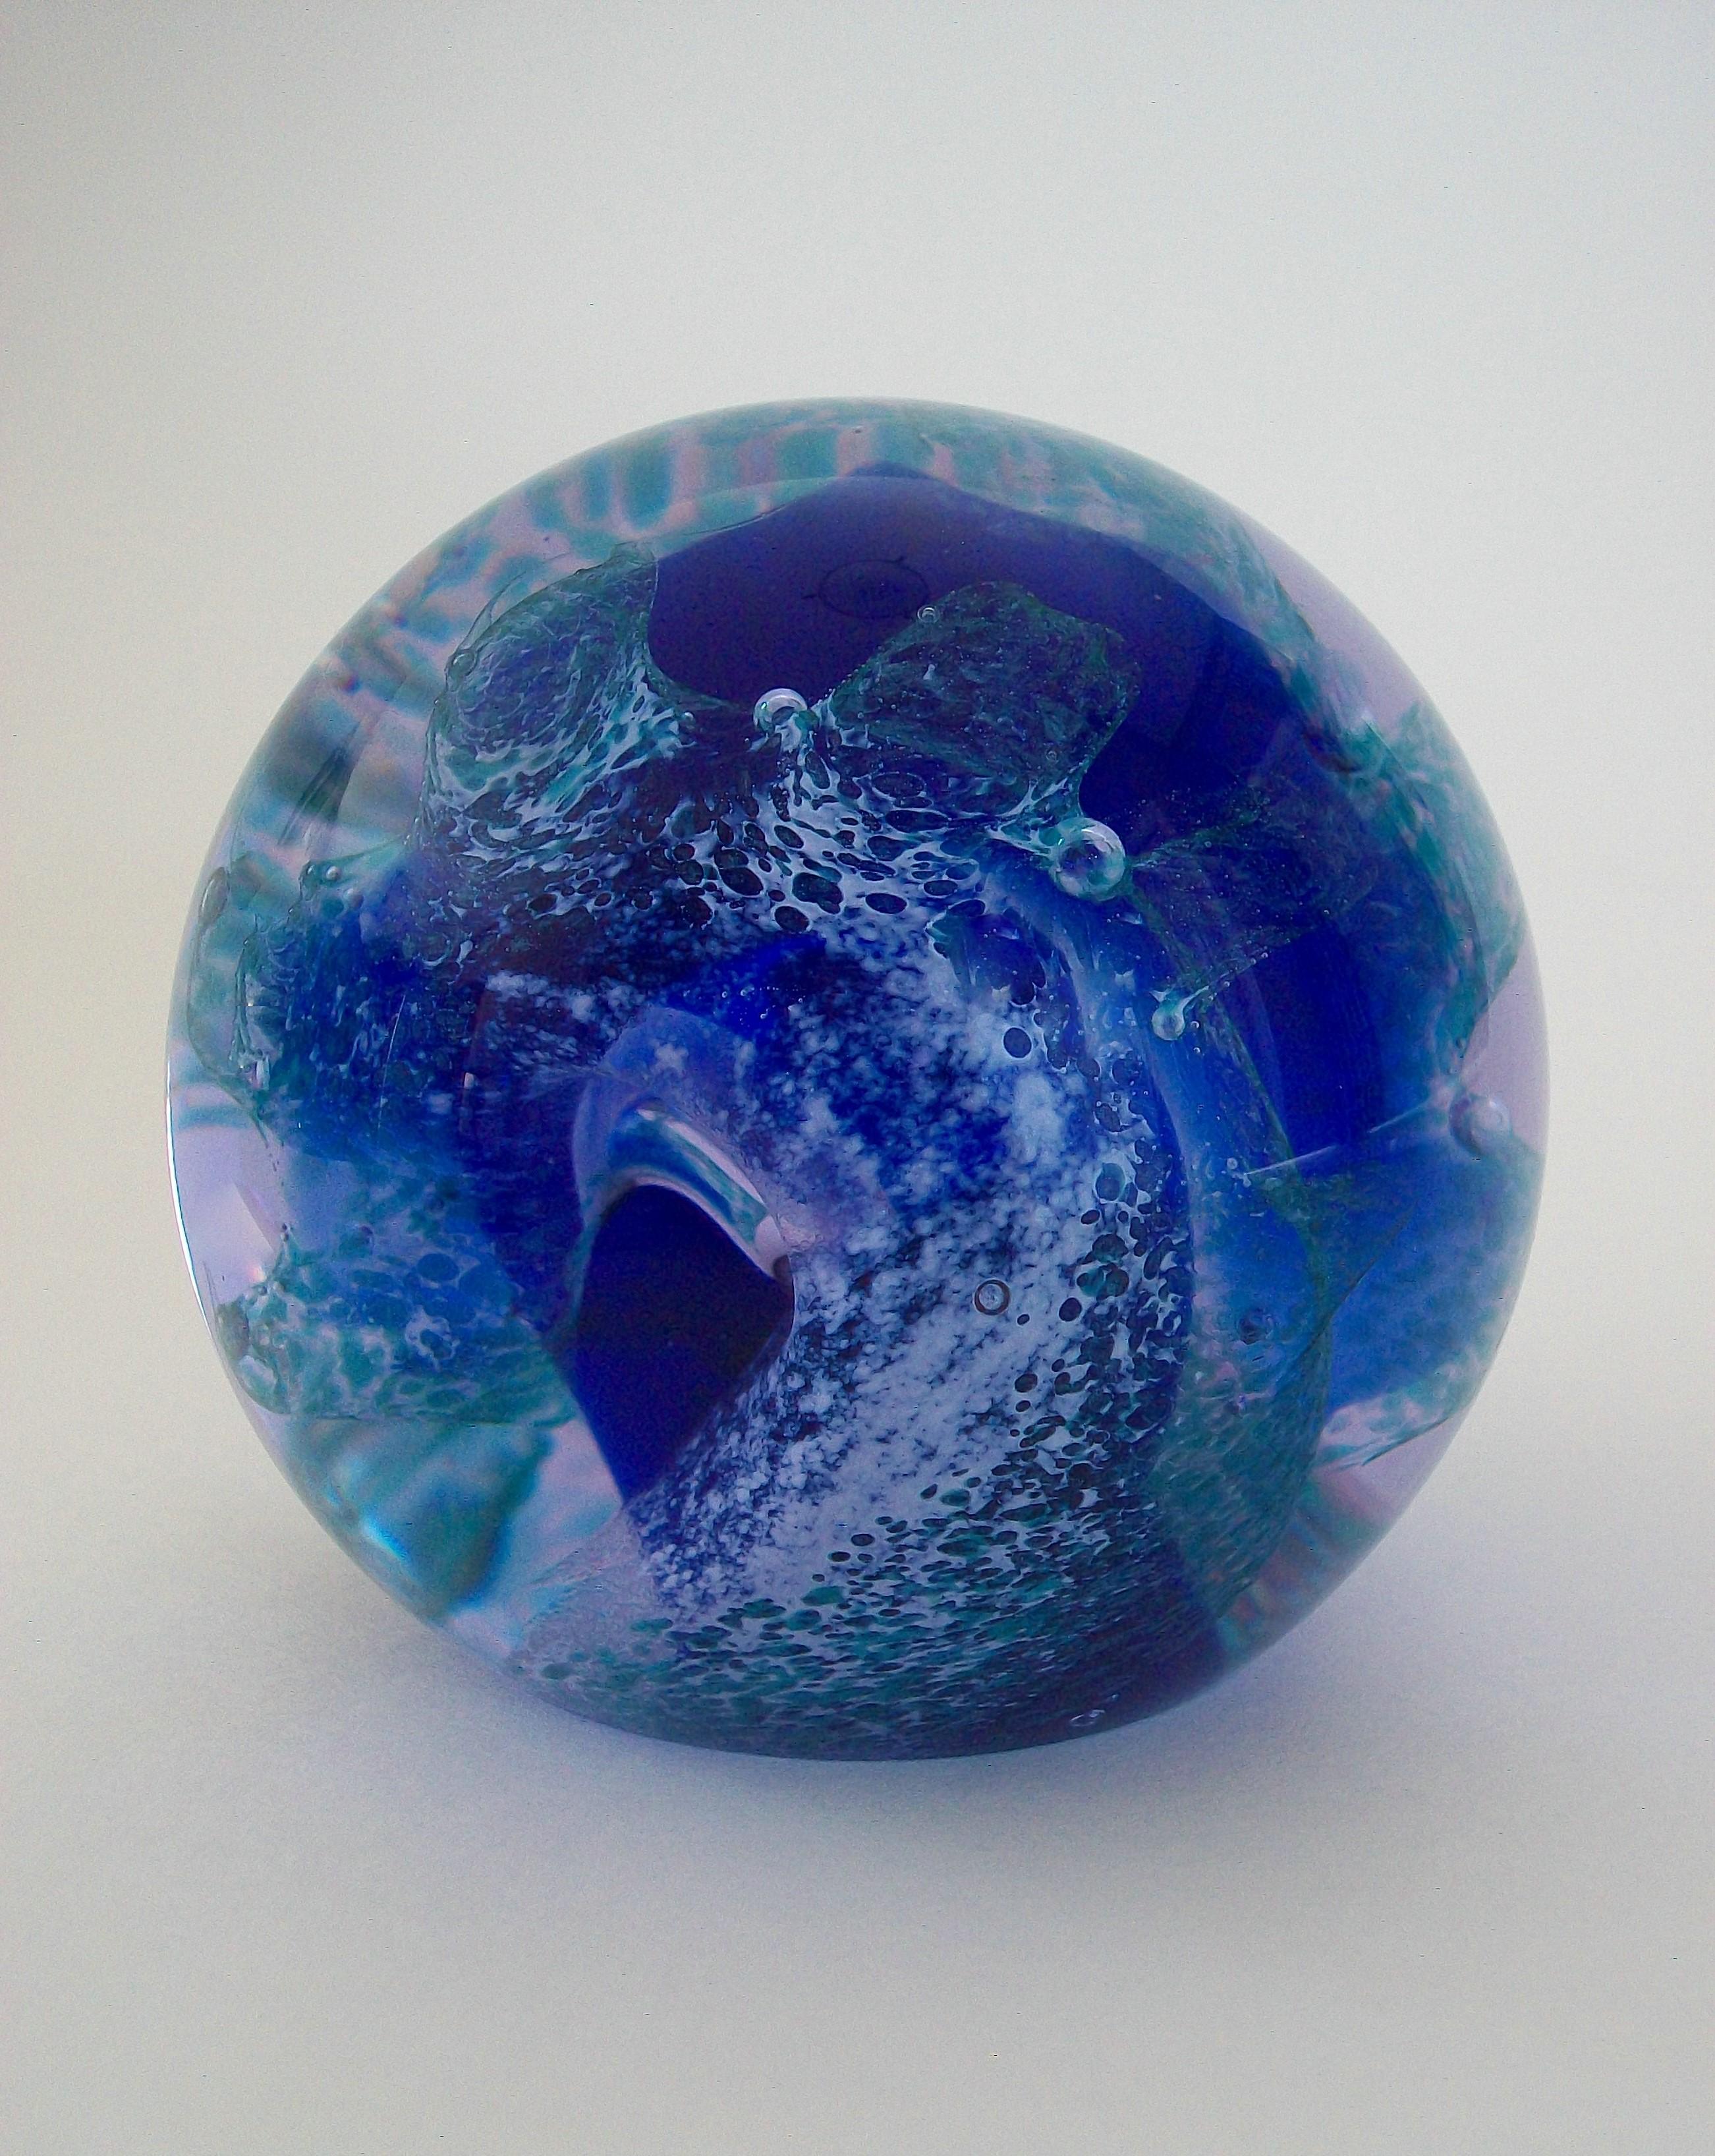 CAITHNESS (Manufacturer) - High Seas (Collection) - H87830 (Identification Number) - Vintage art glass paperweight - striking design - signed and numbered on the base - United Kingdom (Scotland) - late 20th century.

Excellent / mint vintage